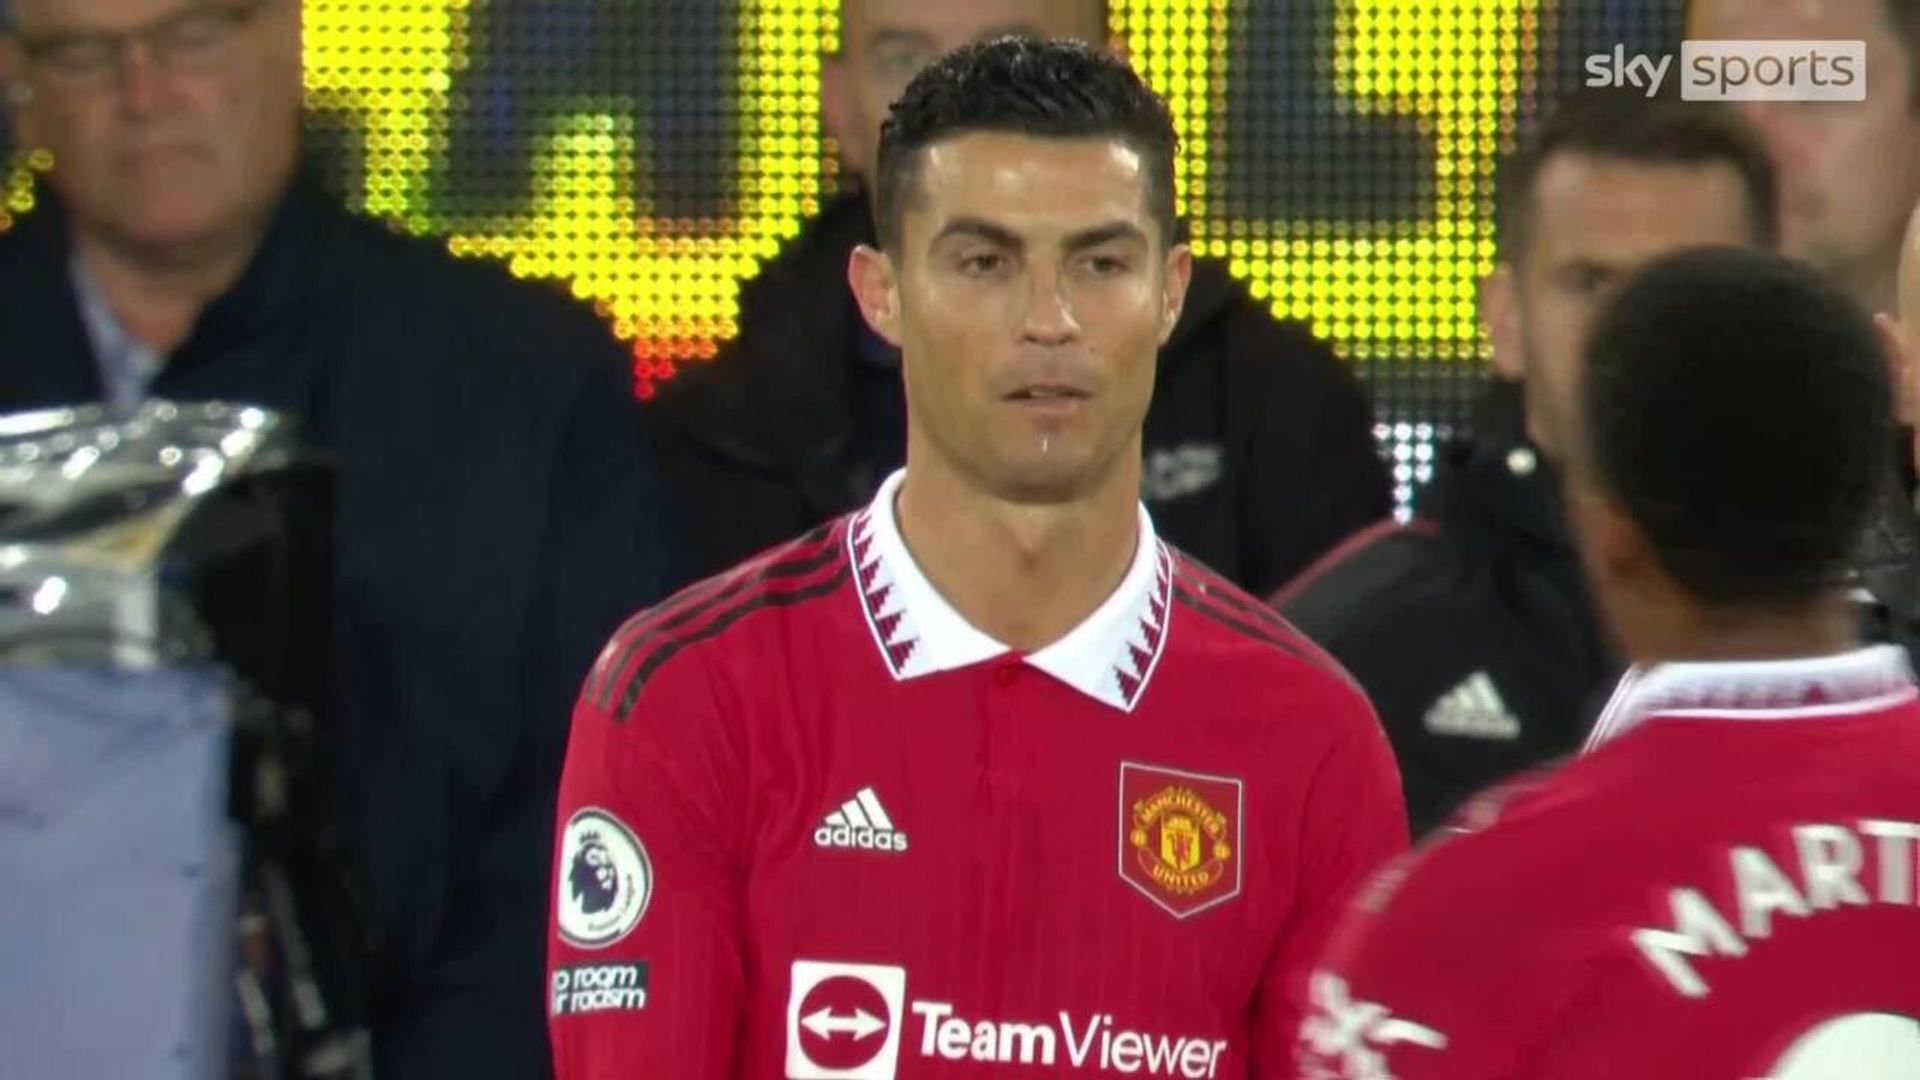 Stam: Ronaldo would have got 'hairdryer treatment' under Sir Alex for leaving early